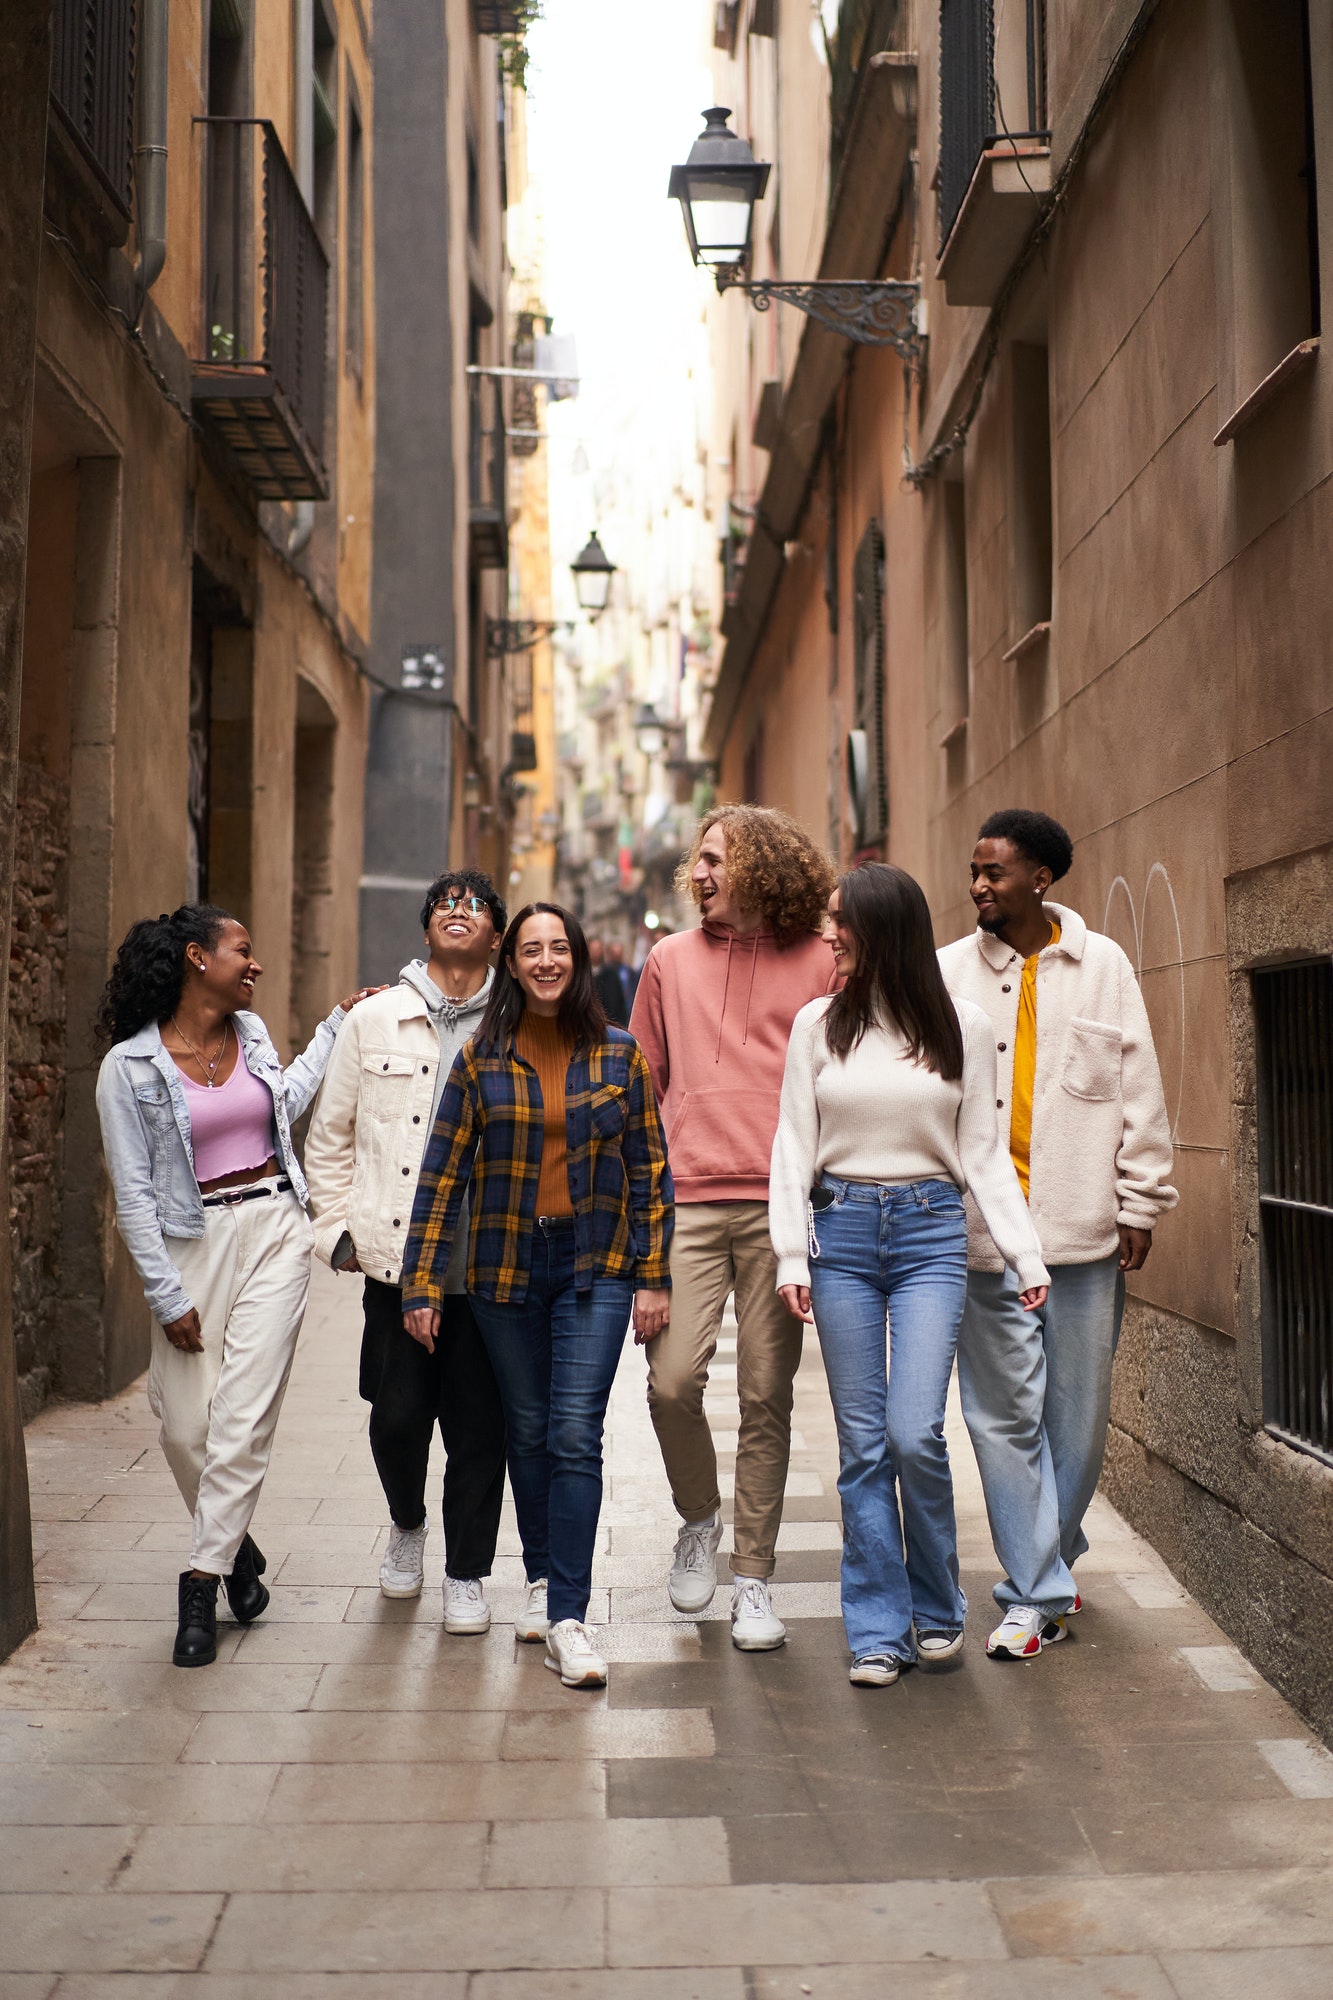 Vertical photo of young happy people walking in the street of the city. Smiling students